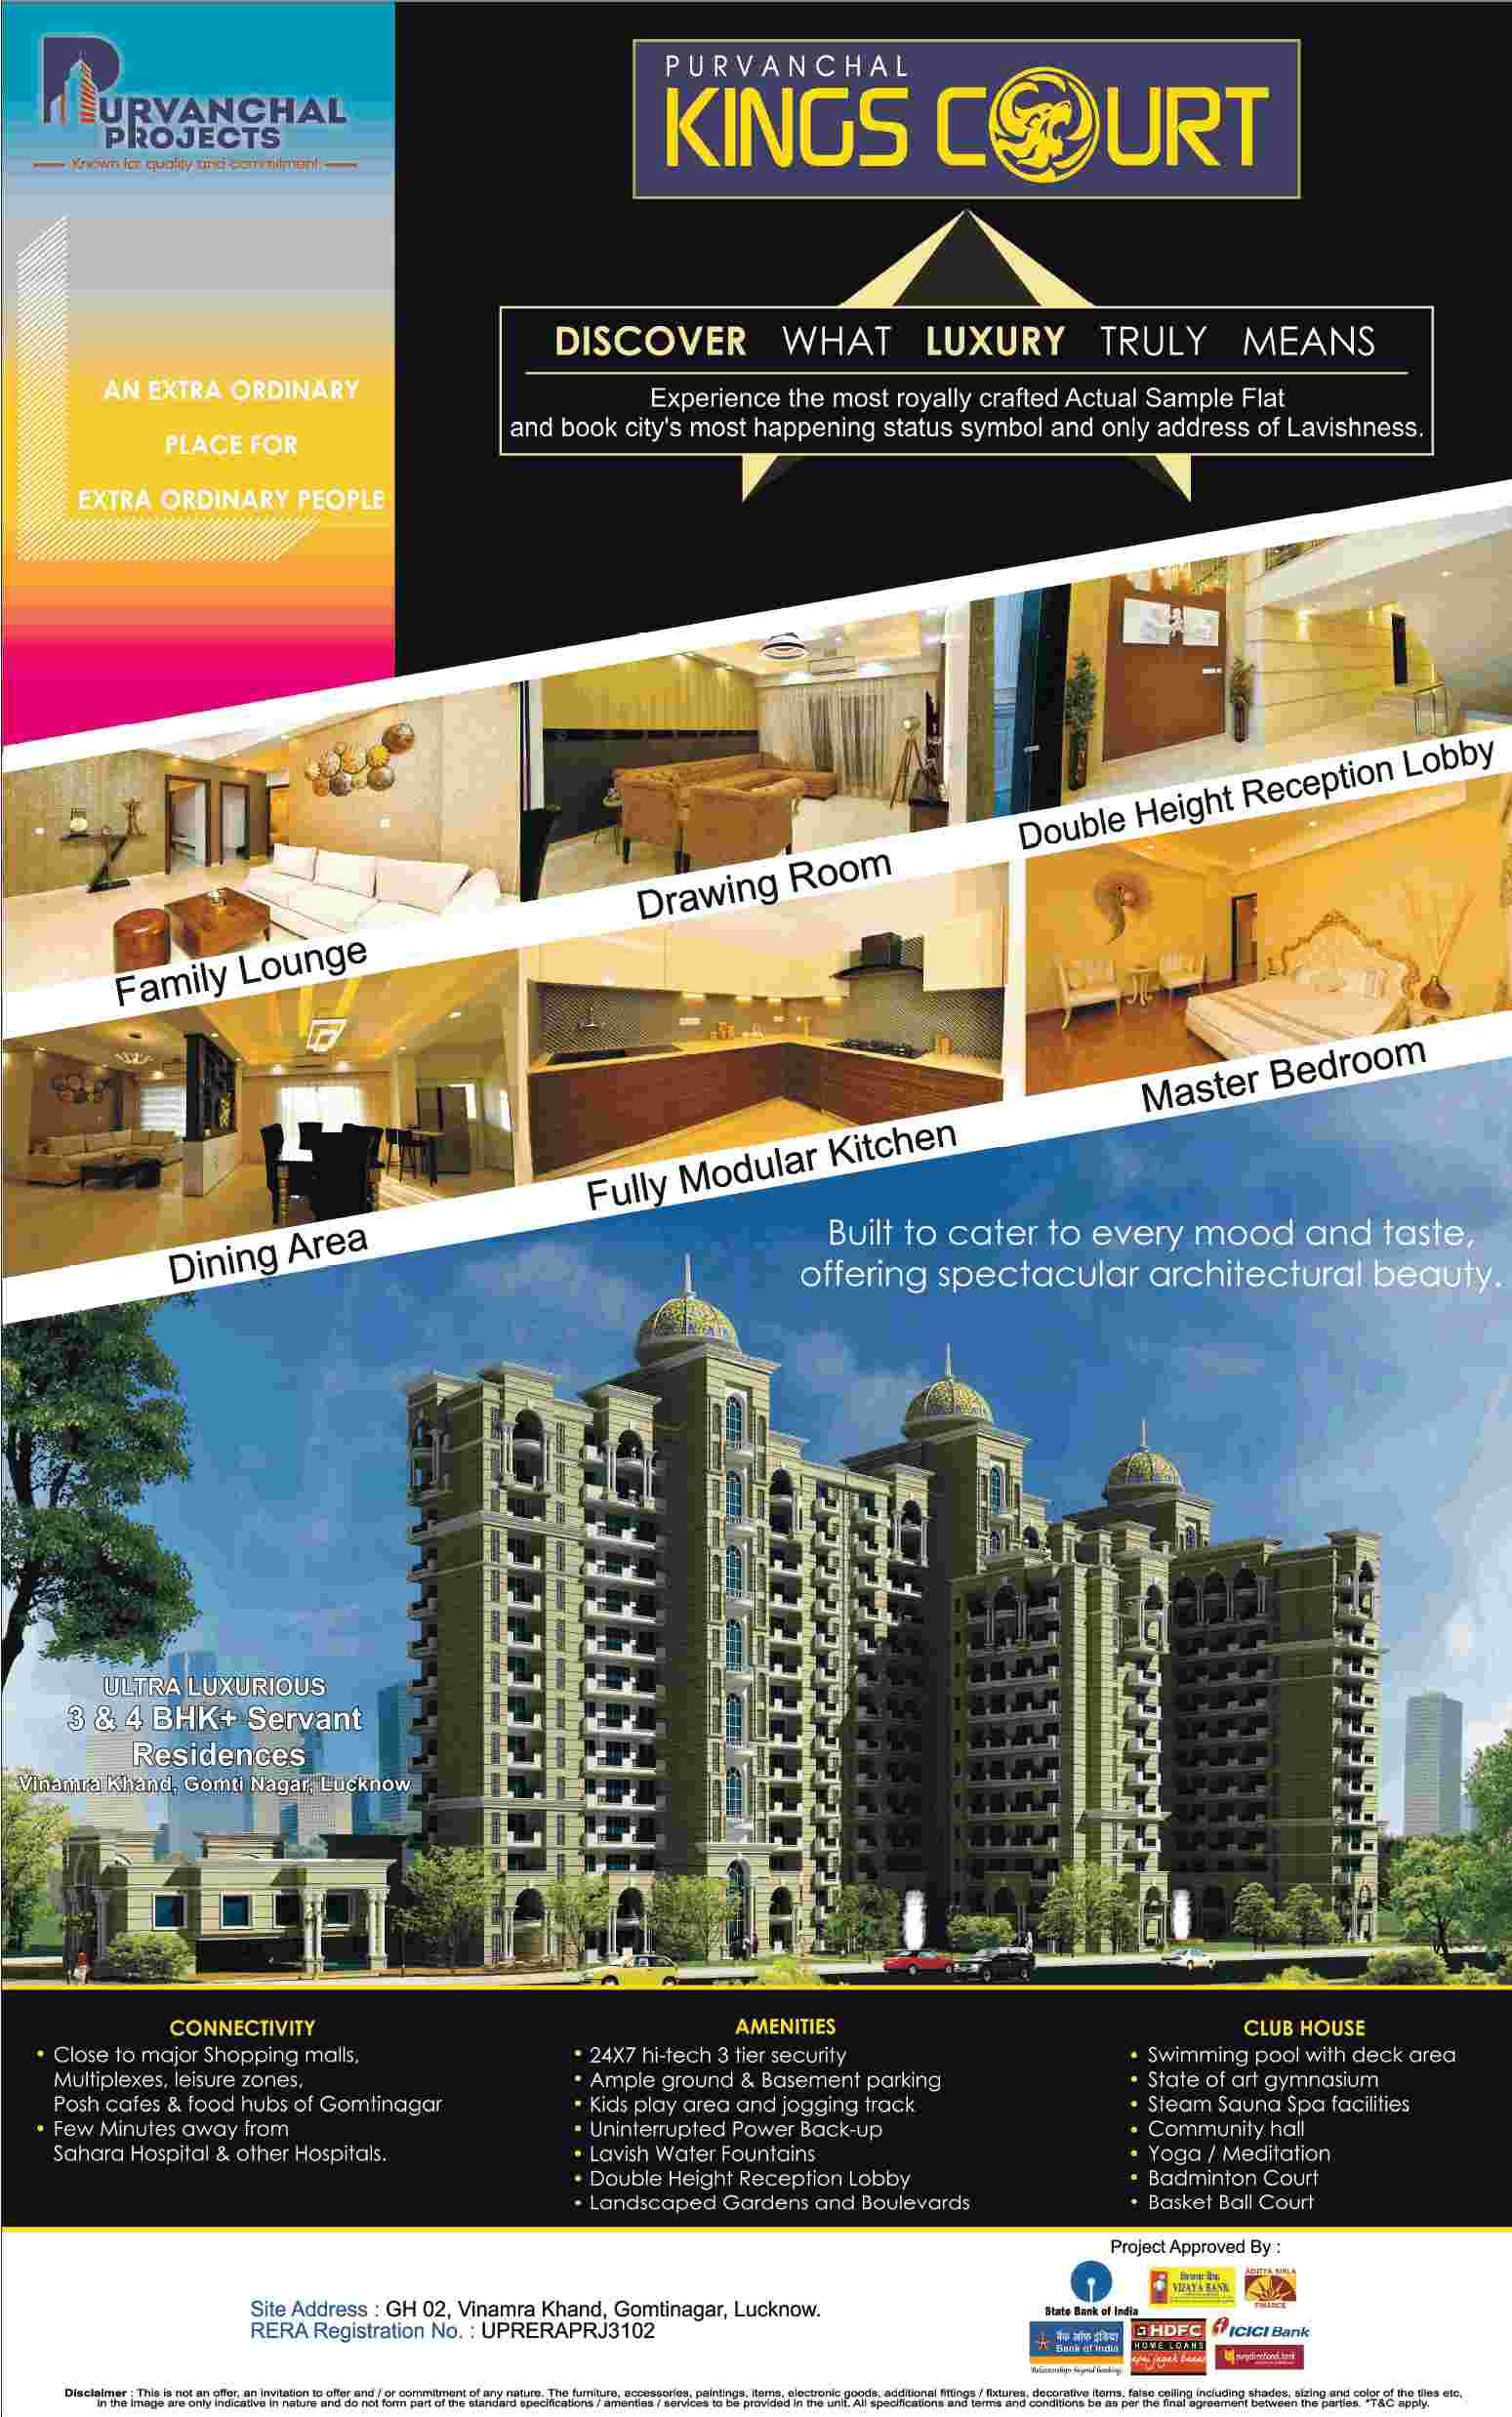 Experience the most royally crafted sample flat at Purvanchal Kings Court in Lucknow Update